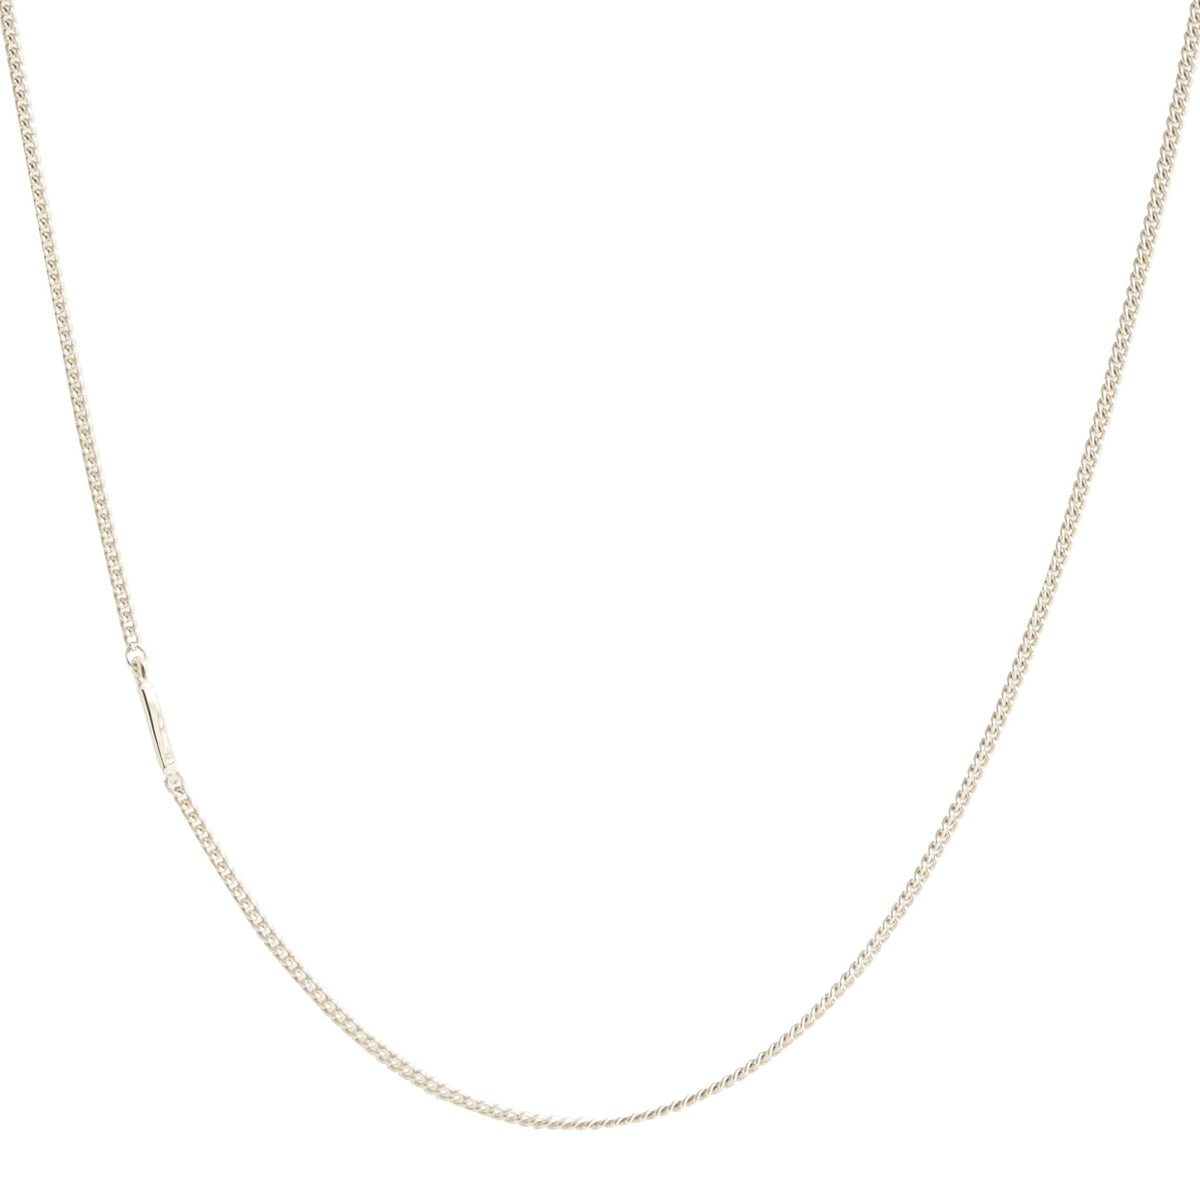 NOTABLE OFFSET INITIAL NECKLACE - I - GOLD, ROSE GOLD, OR SILVER - SO PRETTY CARA COTTER